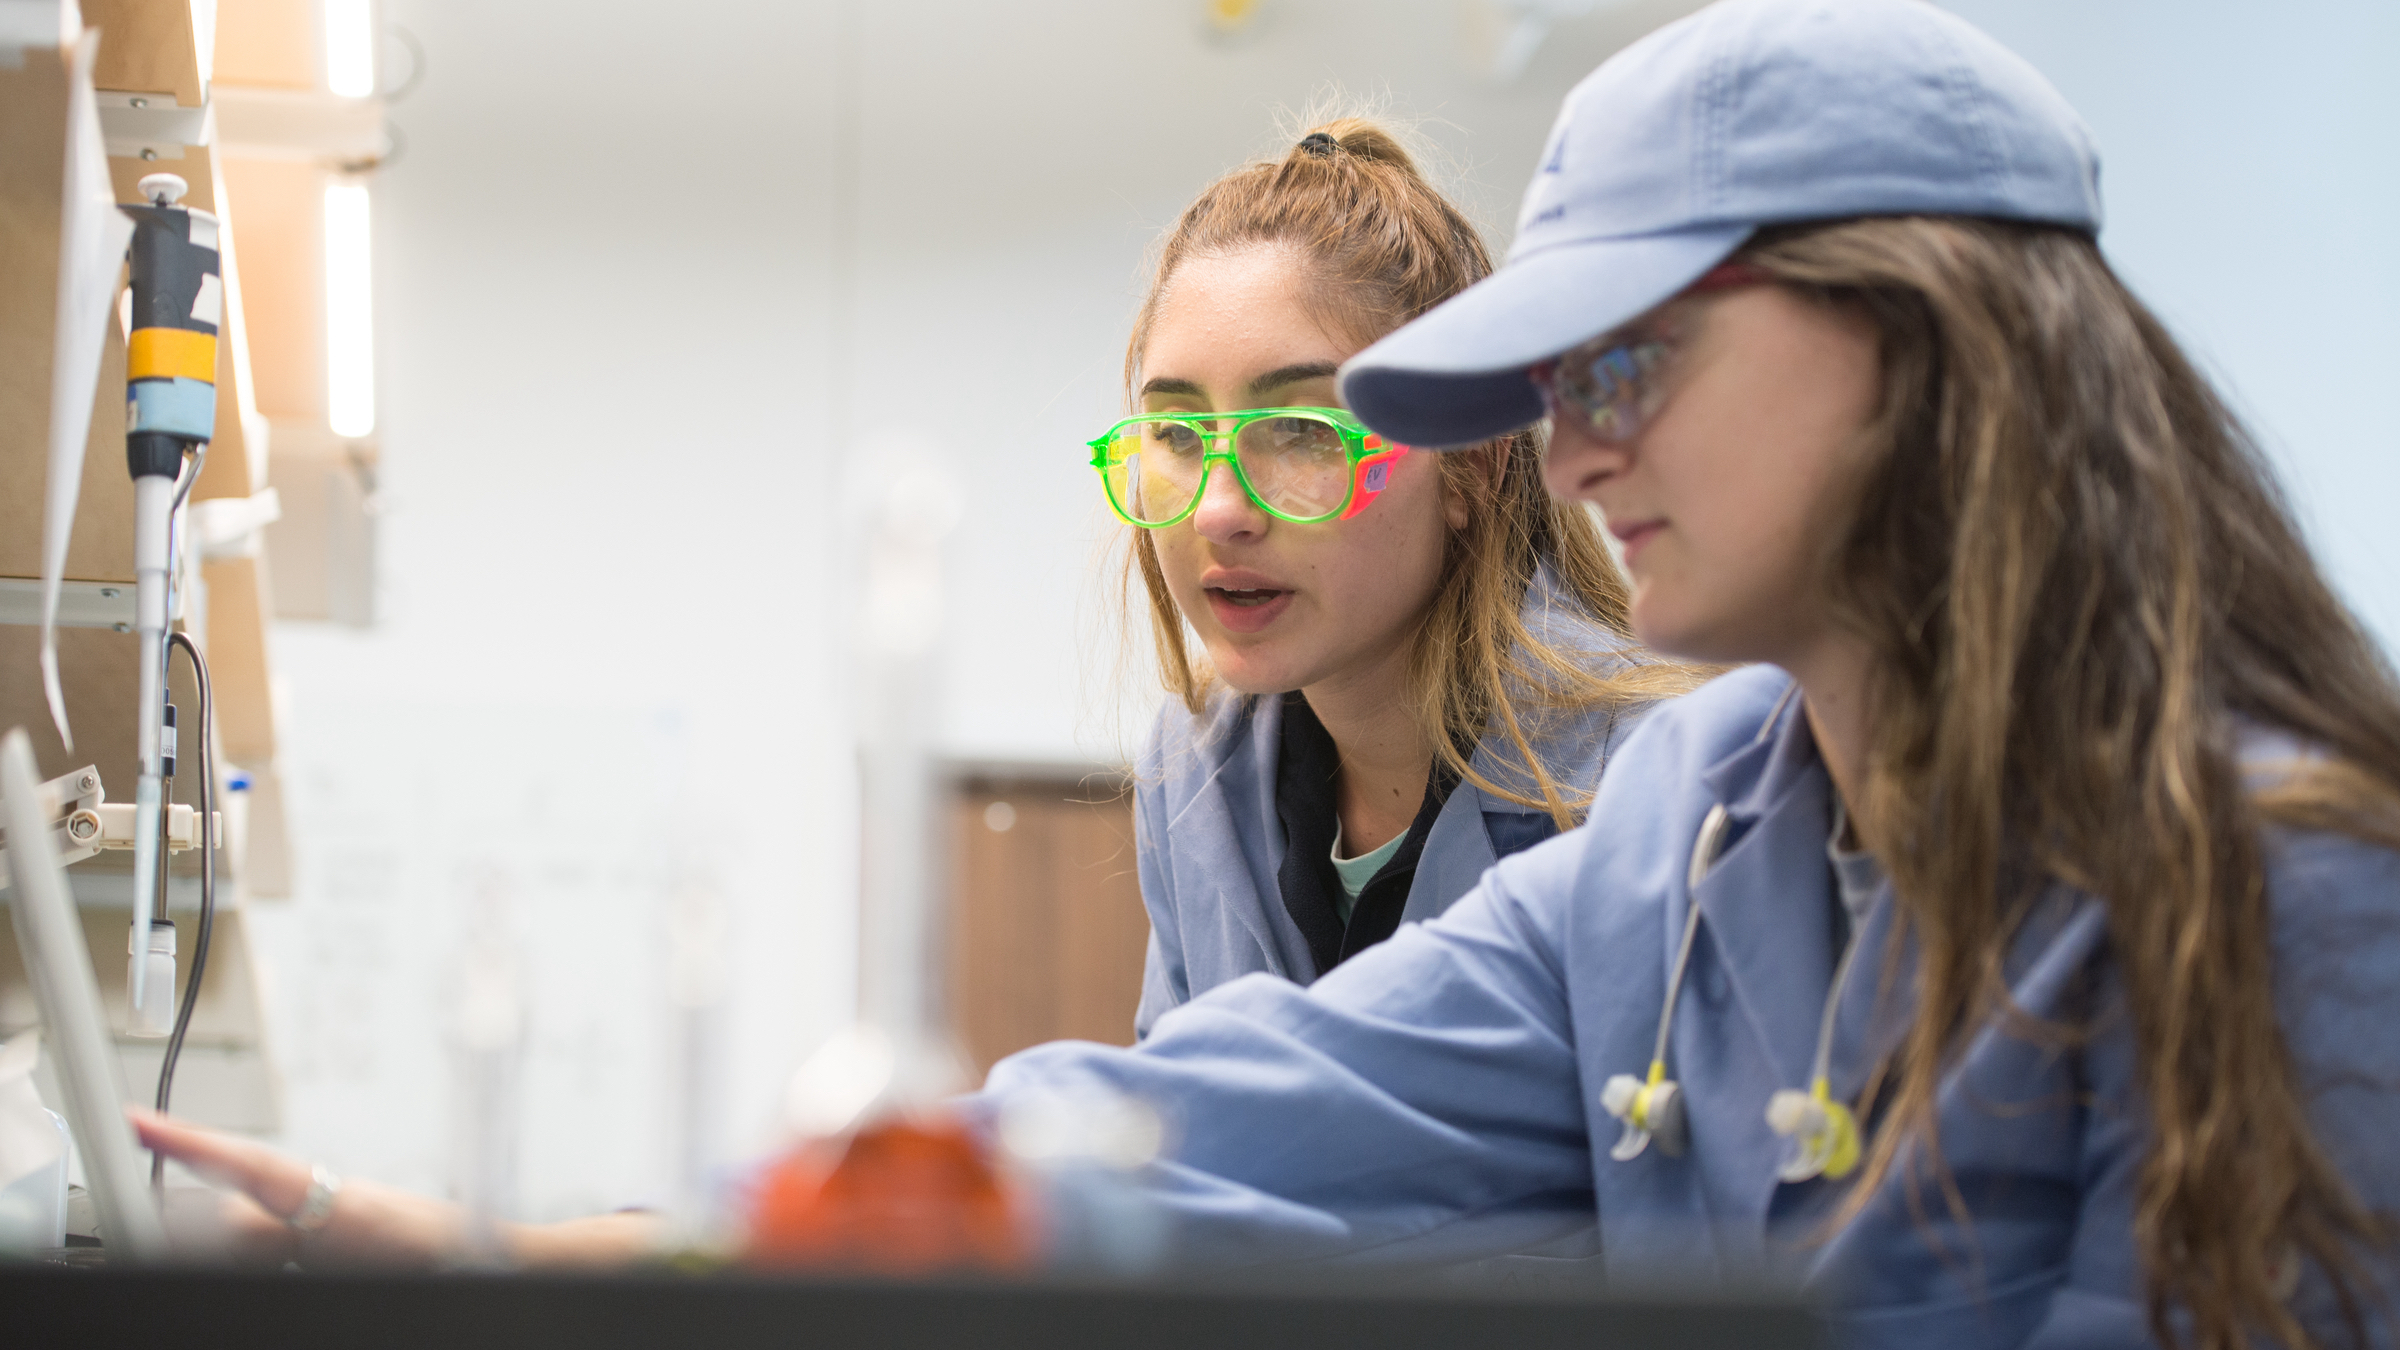 FRI researchers in a lab wearing goggles point to a finding